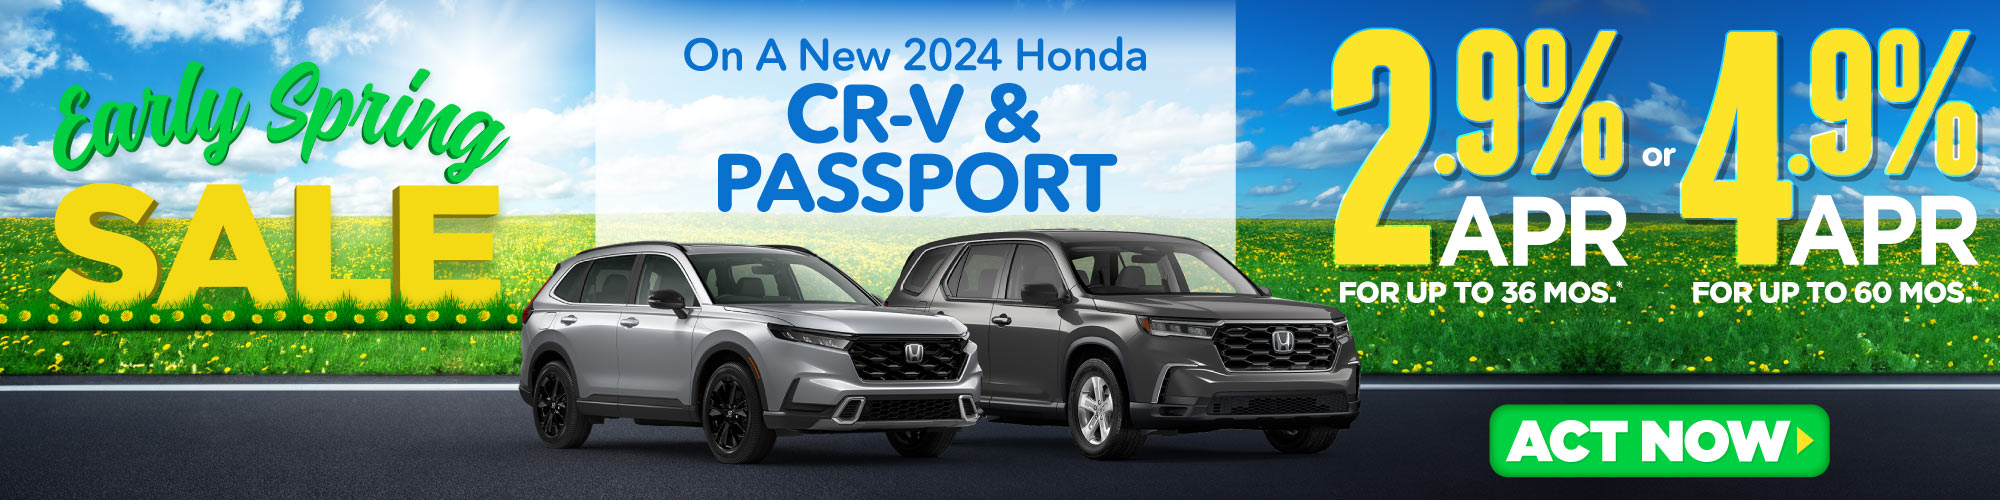 New 2022 Honda Accord Gas/Hybrid or 2023 Passport | As Low as 2.9% APR for up to 48 mos* | Act Now